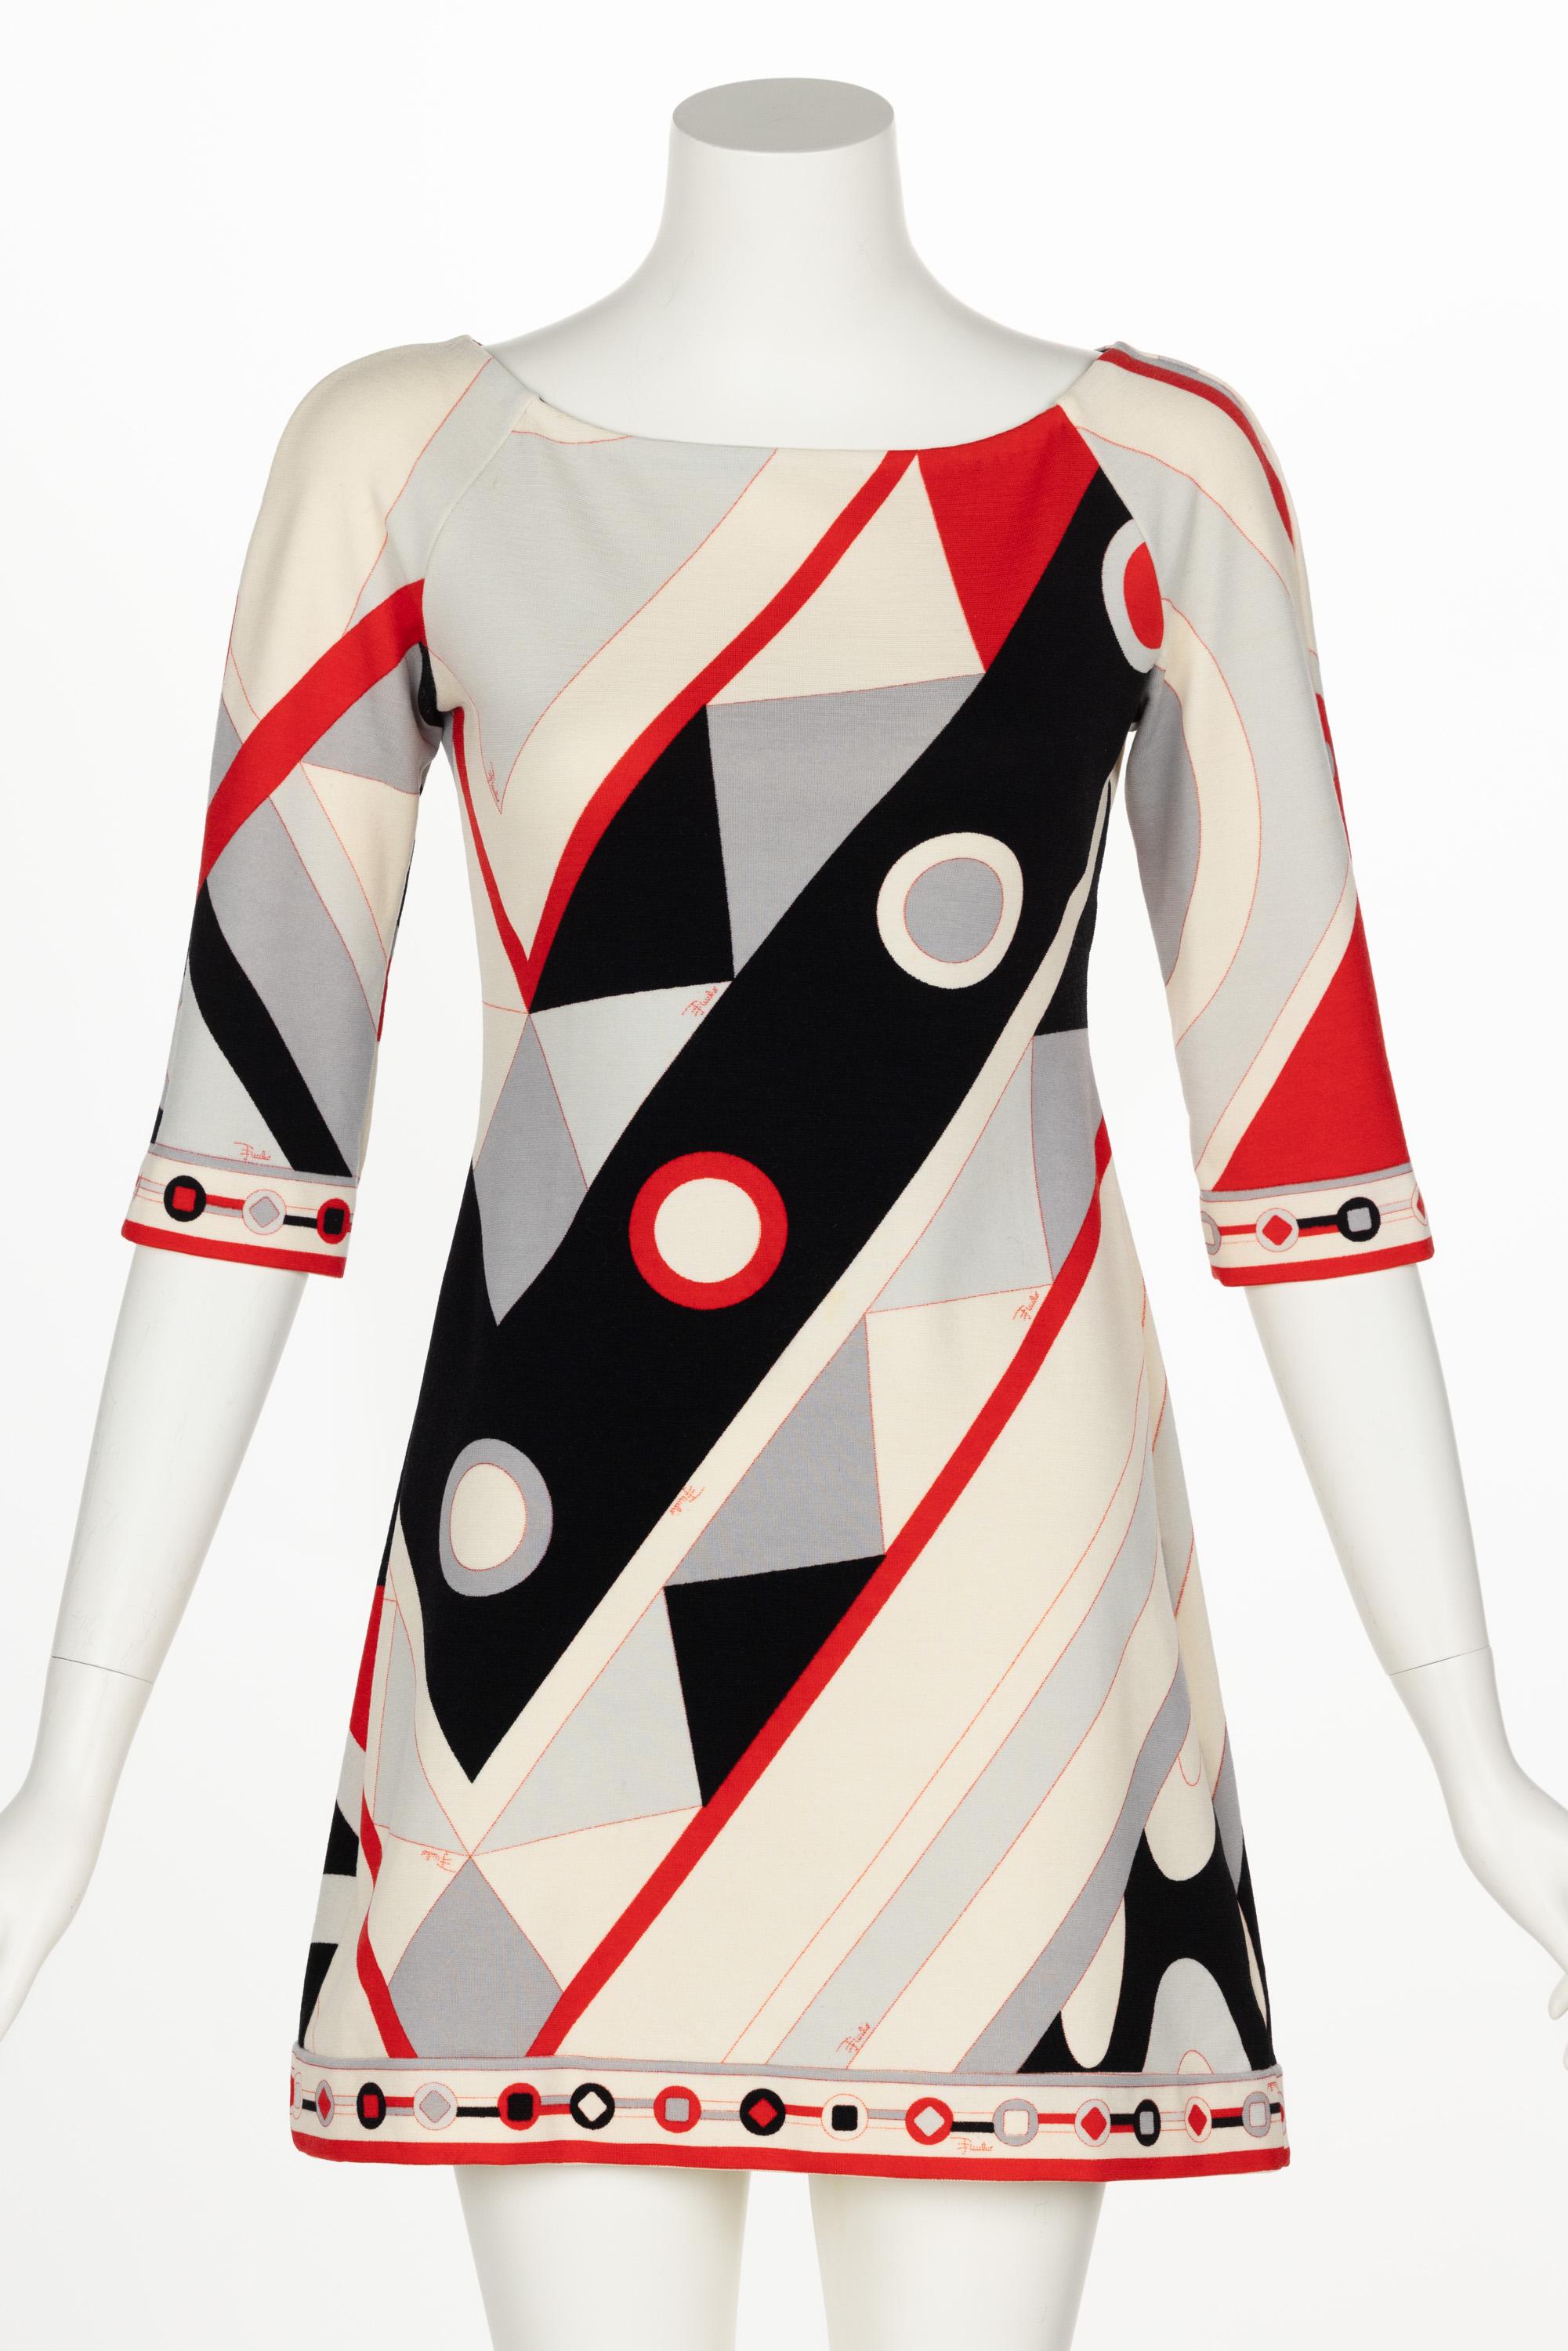 Emilio Pucci is a legendary master of prints. While his signature consists of vibrant, psychedelic prints that are creatively unrivaled, the house has made efforts to streamline and modernize the Pucci aesthetic since the namesake’s passing in the